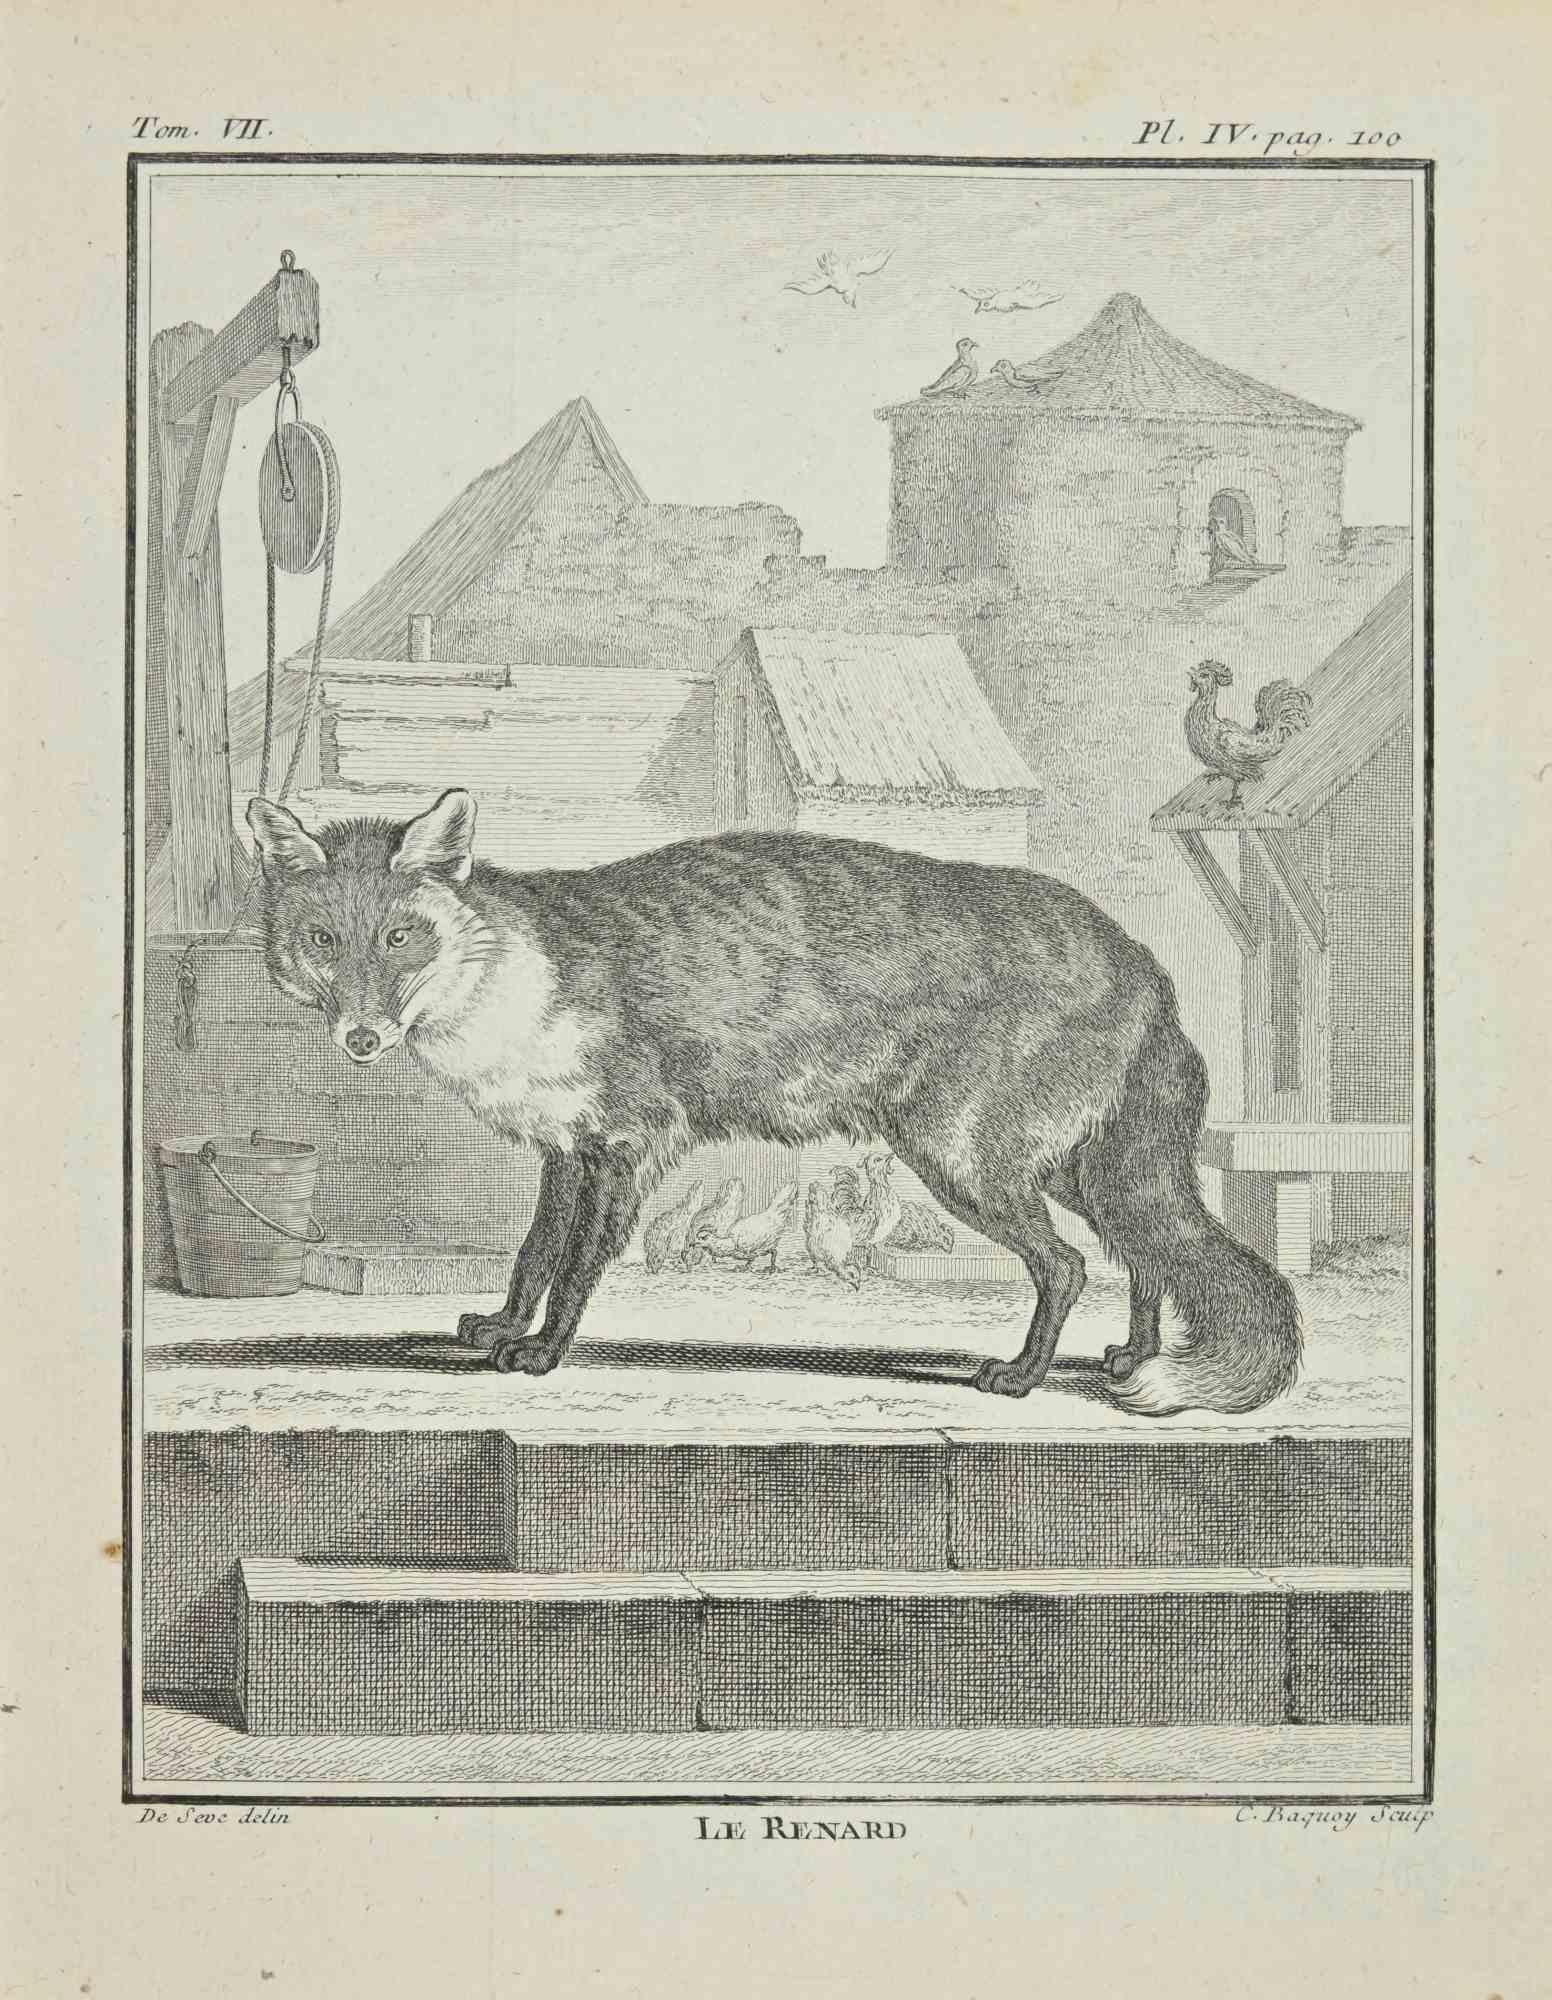 Le Renard is an etching realized by Jean Charles Baquoy in 1771.

It belongs to the suite "Histoire Naturelle de Buffon".

The Artist's signature is engraved lower right.

Good conditions.